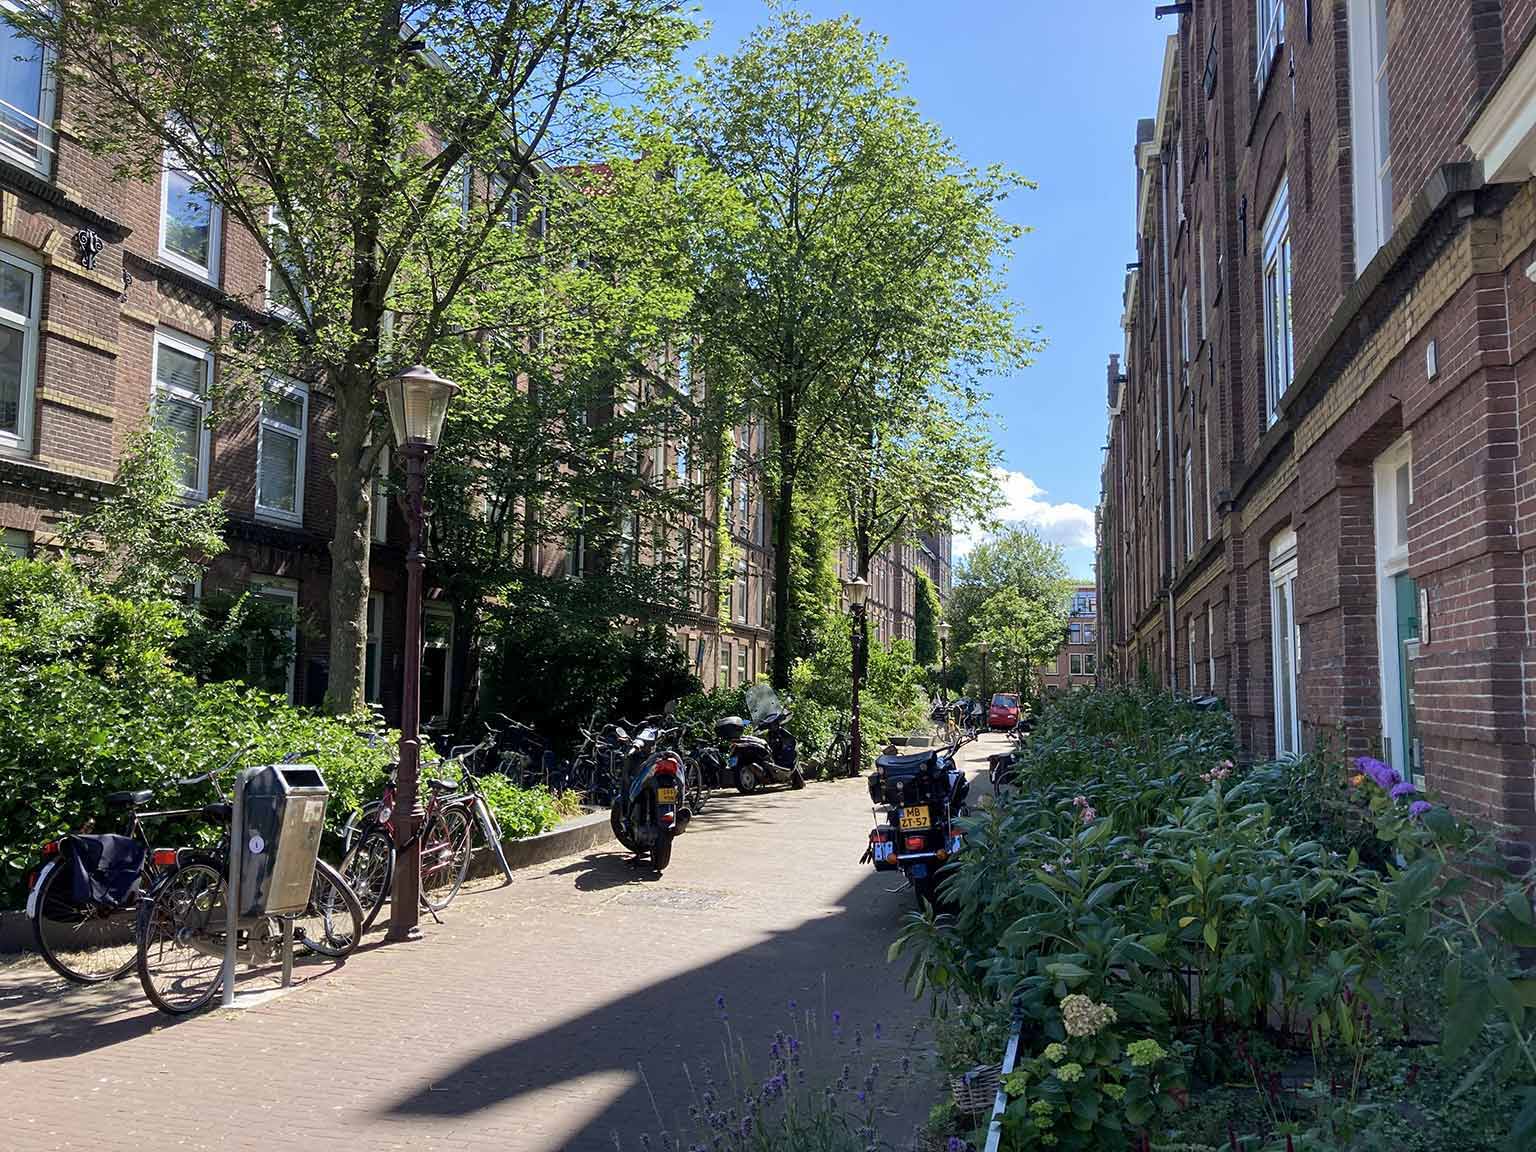 Dirk Hartoghstraat, Amsterdam, seen from the side of the Houtmankade